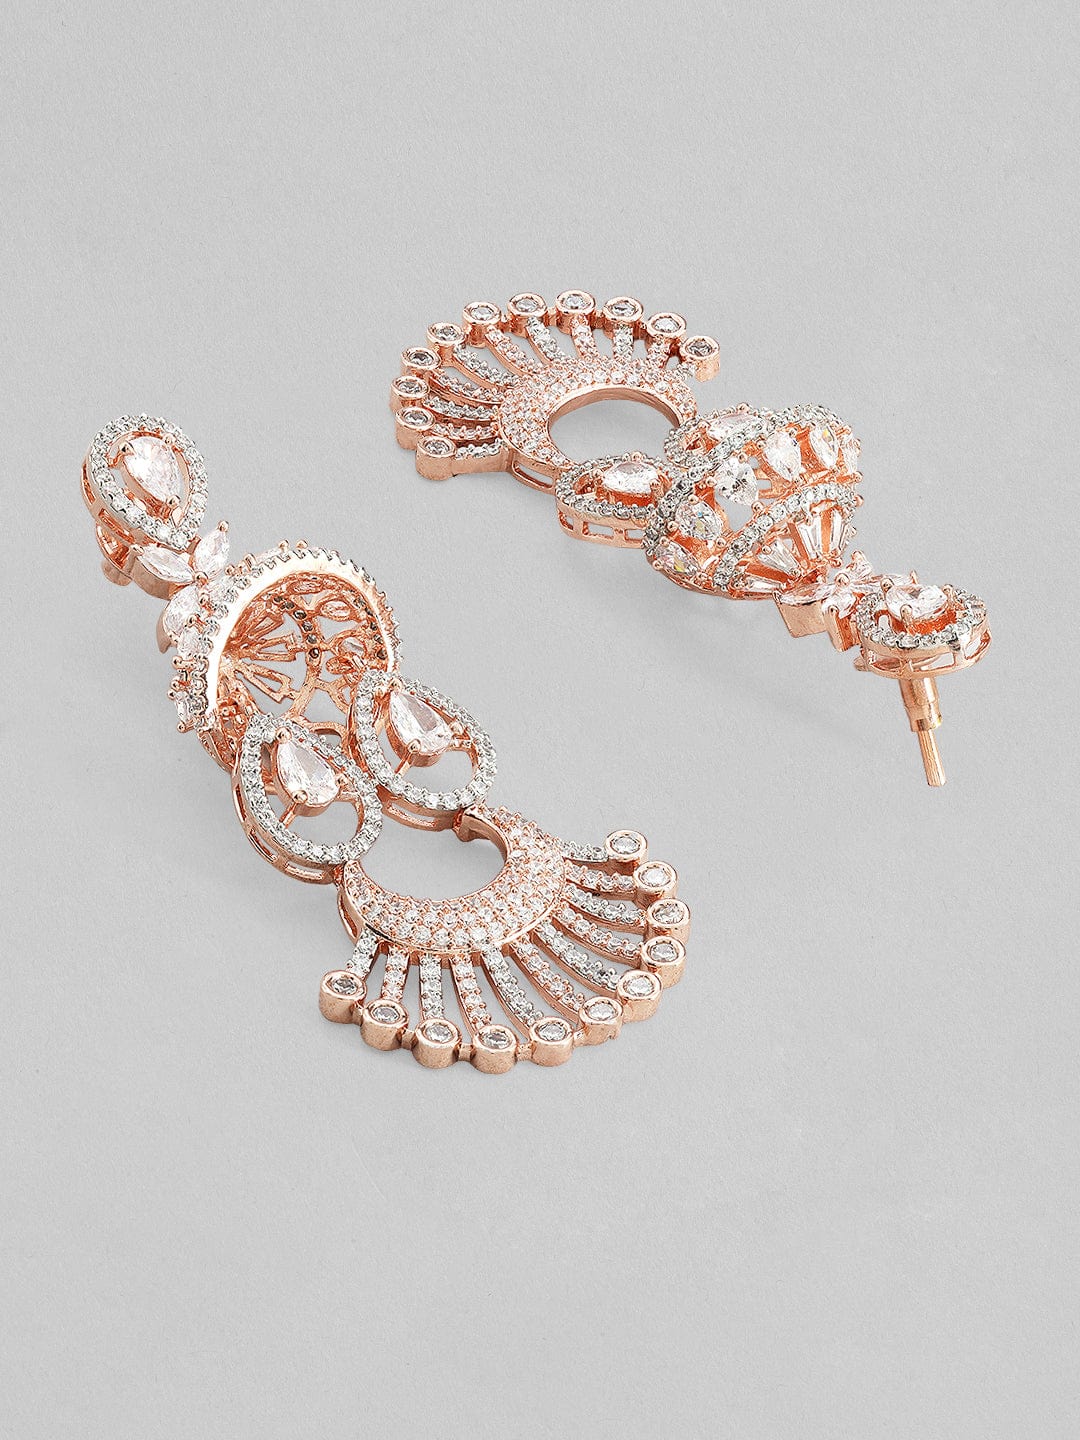 Rubans Rose Gold Plated Drop Earrings With Studded American Stones Earrings